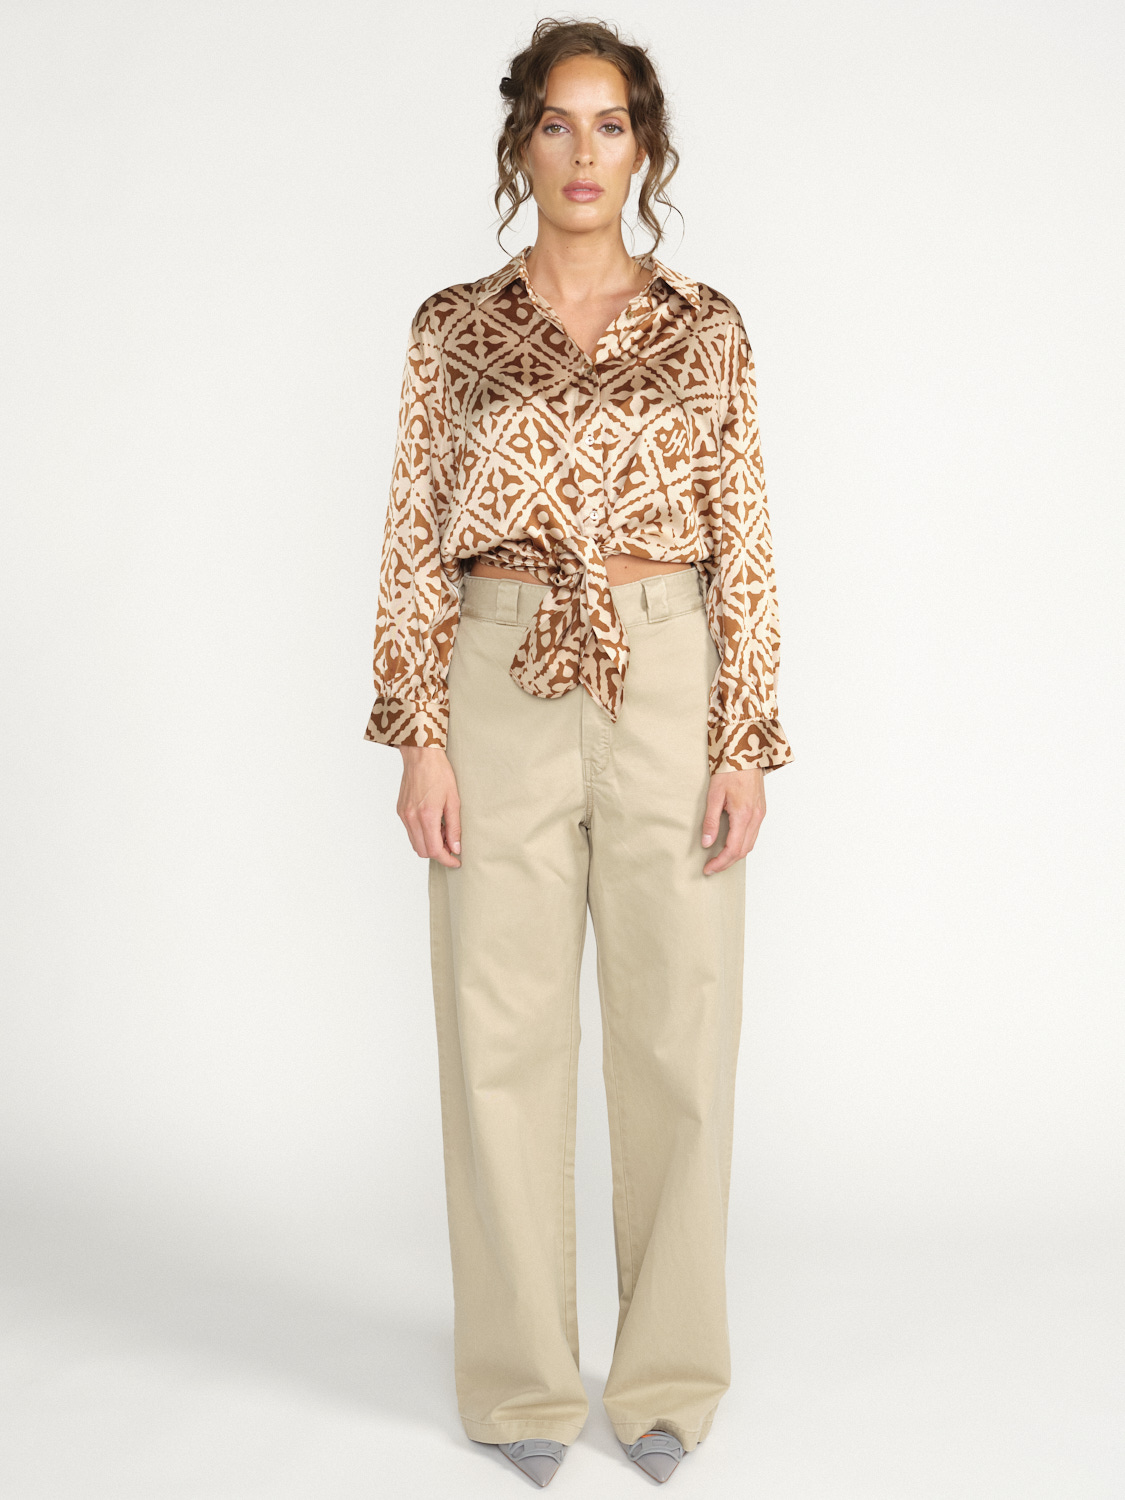 R13 Casual Attraction Pants - High-waisted pants with wide leg beige 26